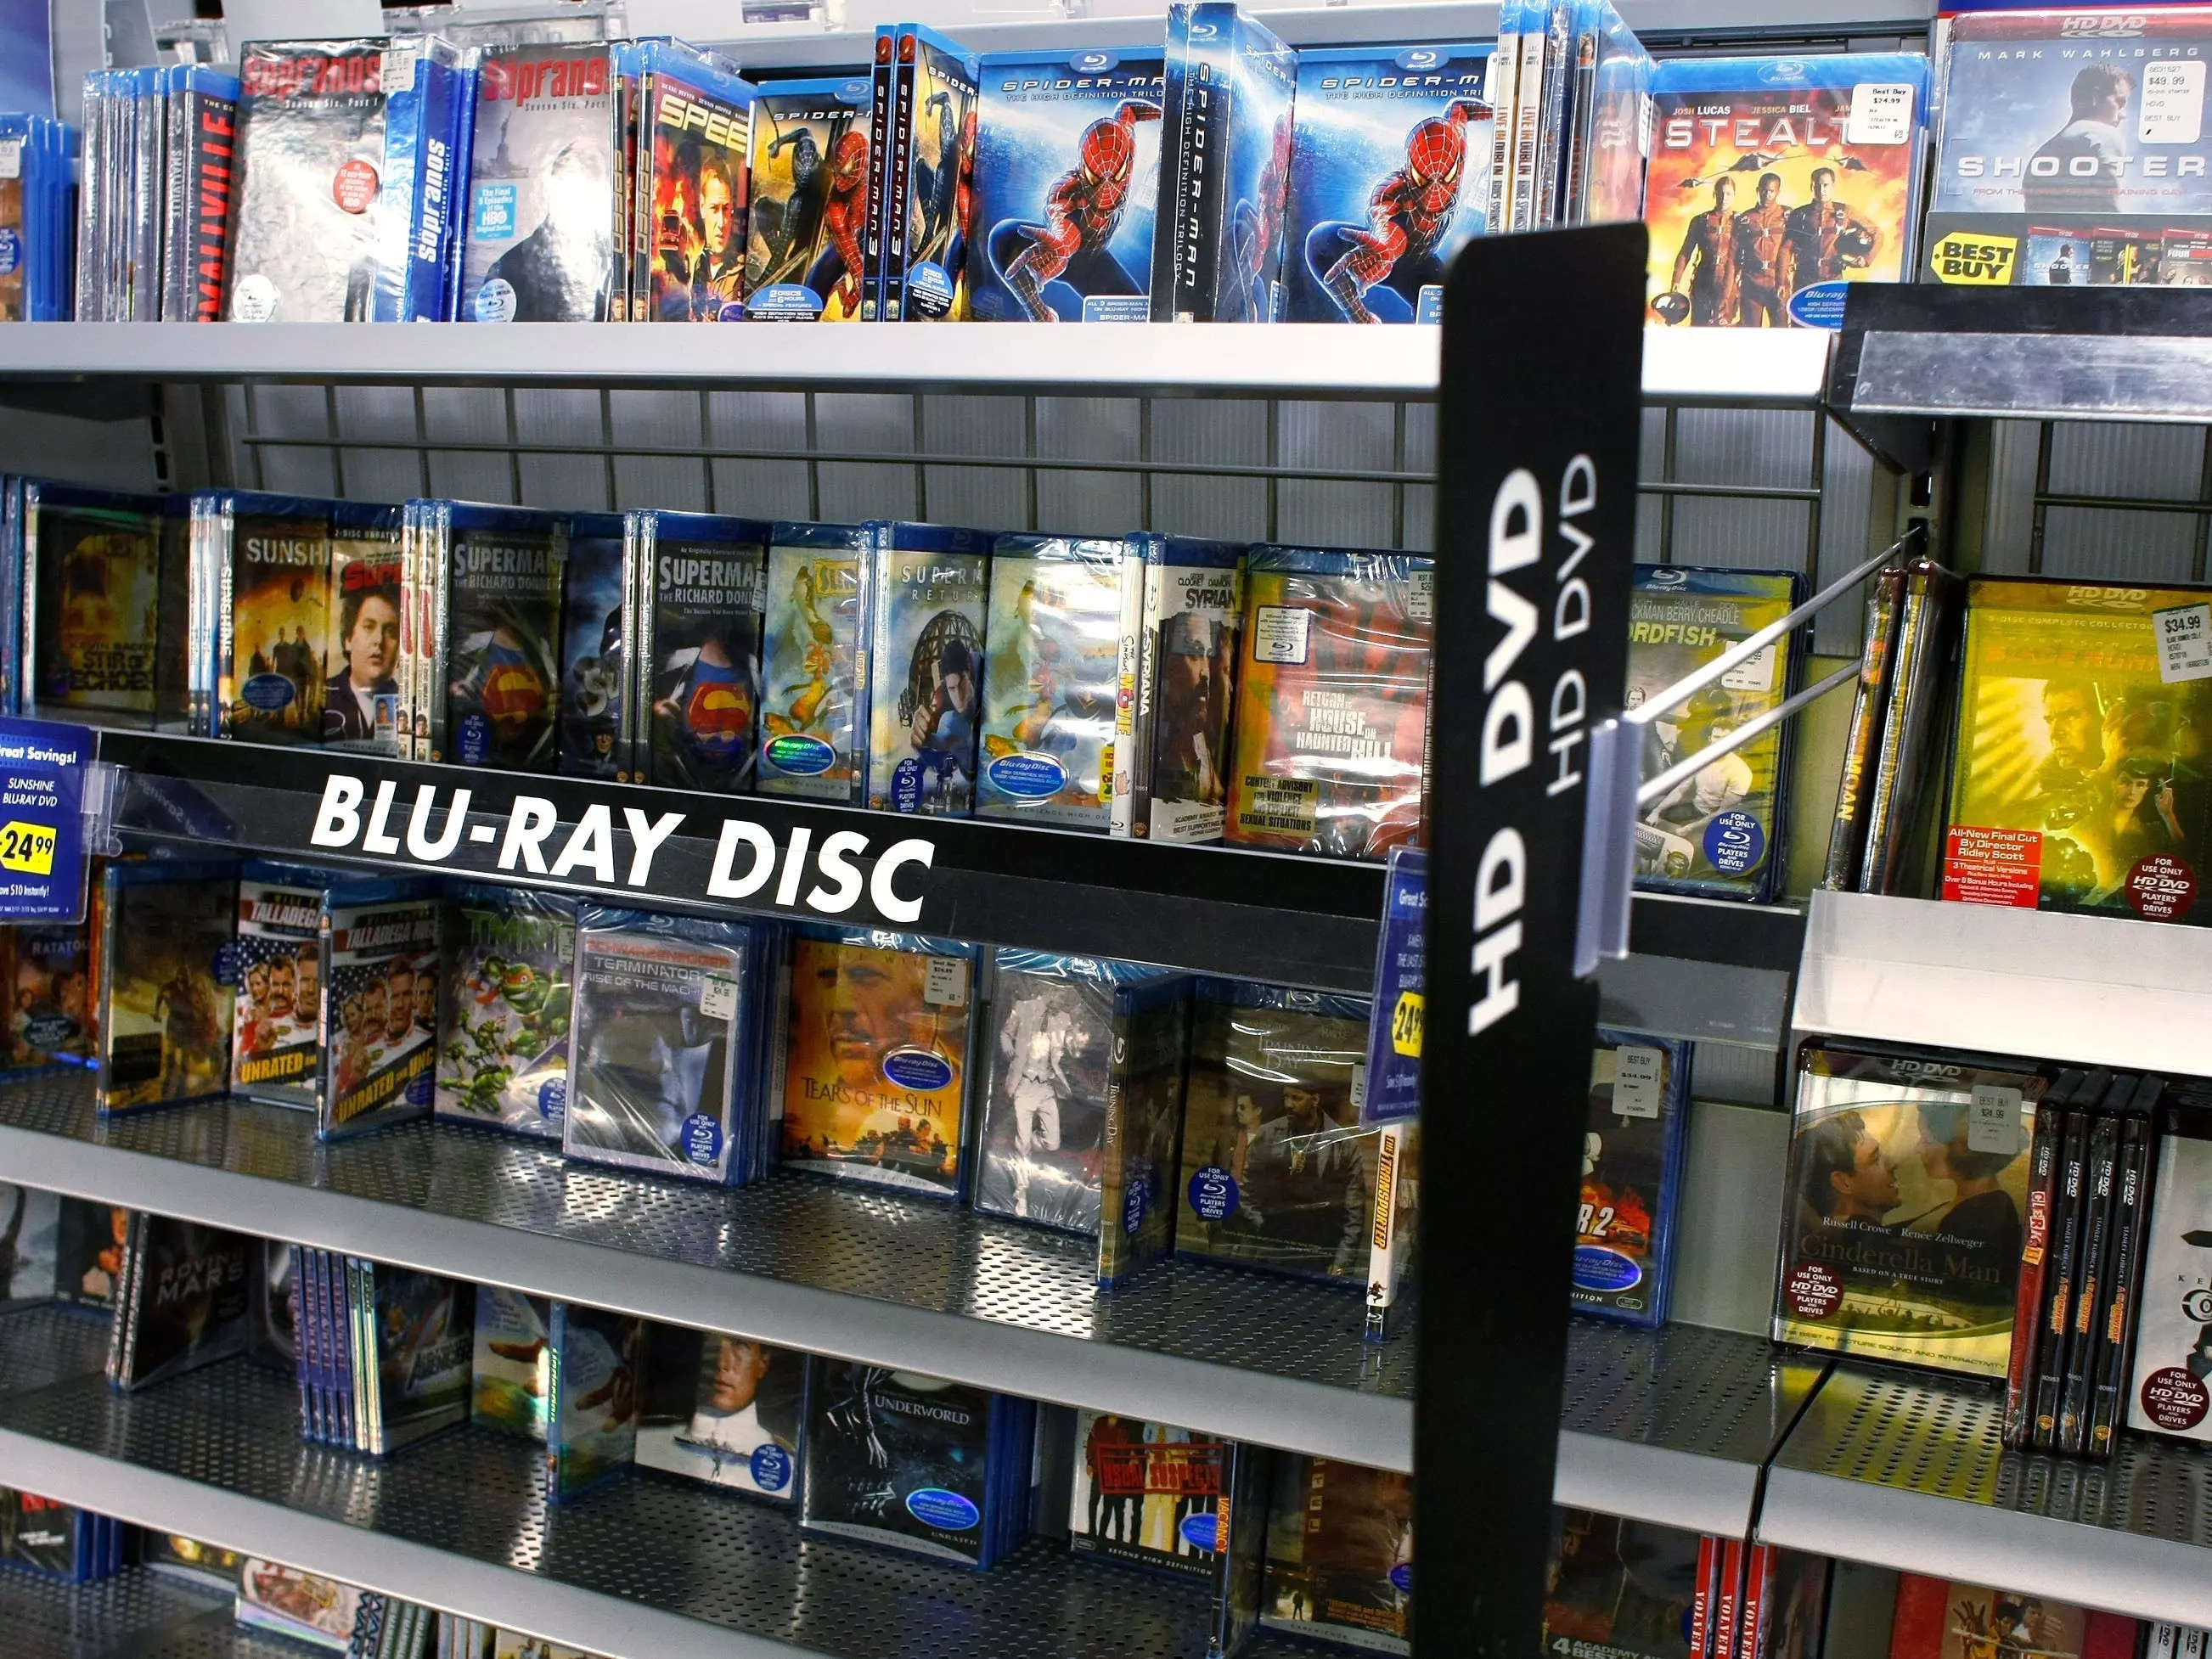 The latest nail in the coffin of DVDs is here